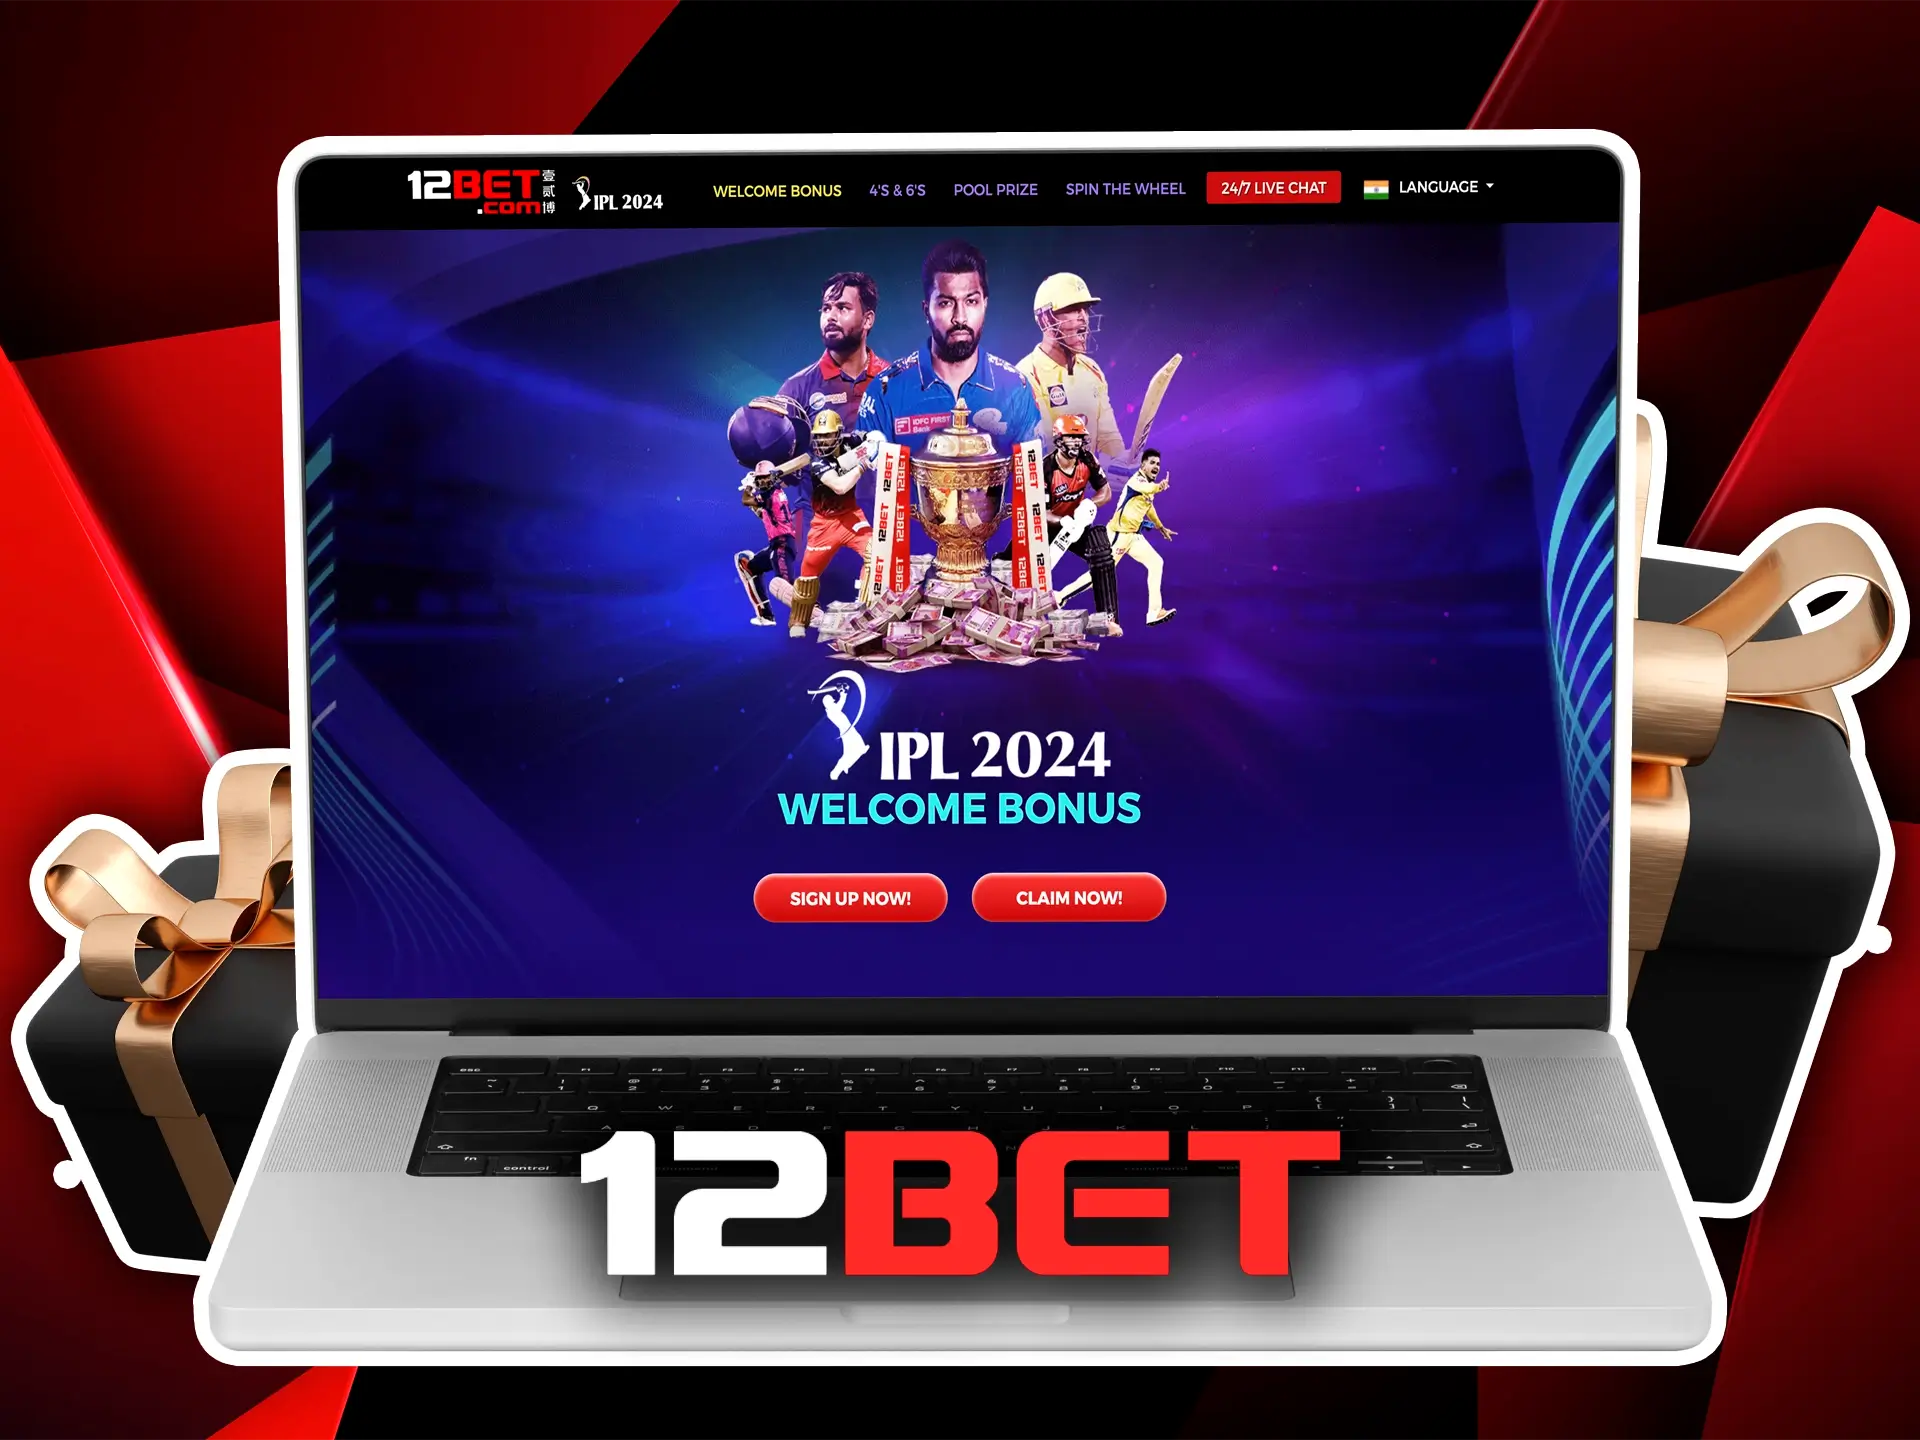 Increase your chances as well as the amount of winnings when betting on IPL at 12Bet bookmaker using bonuses.